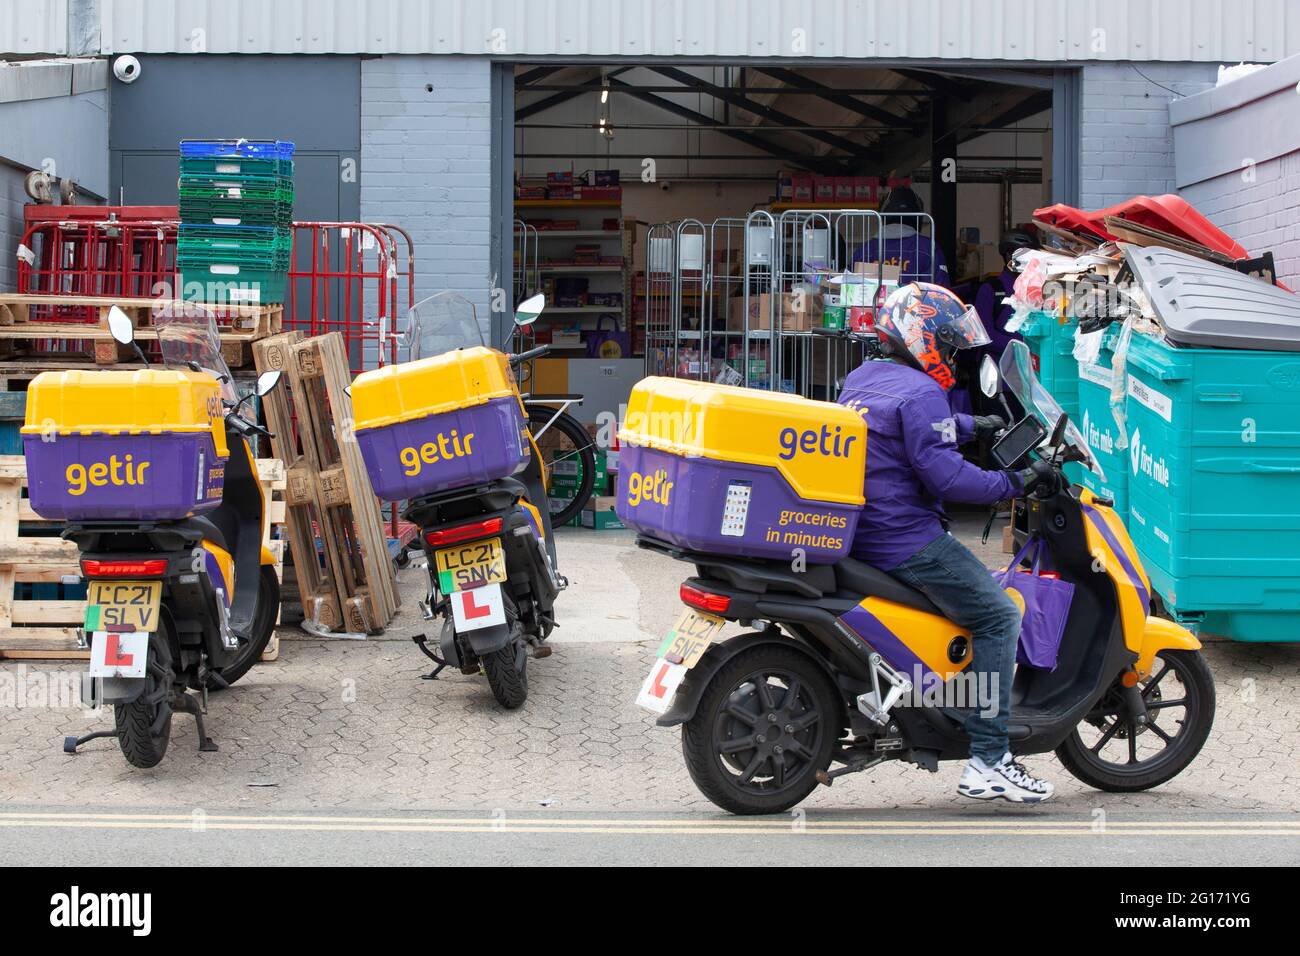 London, UK, 5 June 2021: on a Saturday lunchtime Getir is busy sending out grocery deliveries on electric mopeds from a 'dark shop' on a light industrial estate strategically positioned between Clapham, Balham and Streatham. The Turkish company has recently raised $550 million (£388m) to expand into France, Germany and the USA. Anna Watson/Alamy Live News Stock Photo